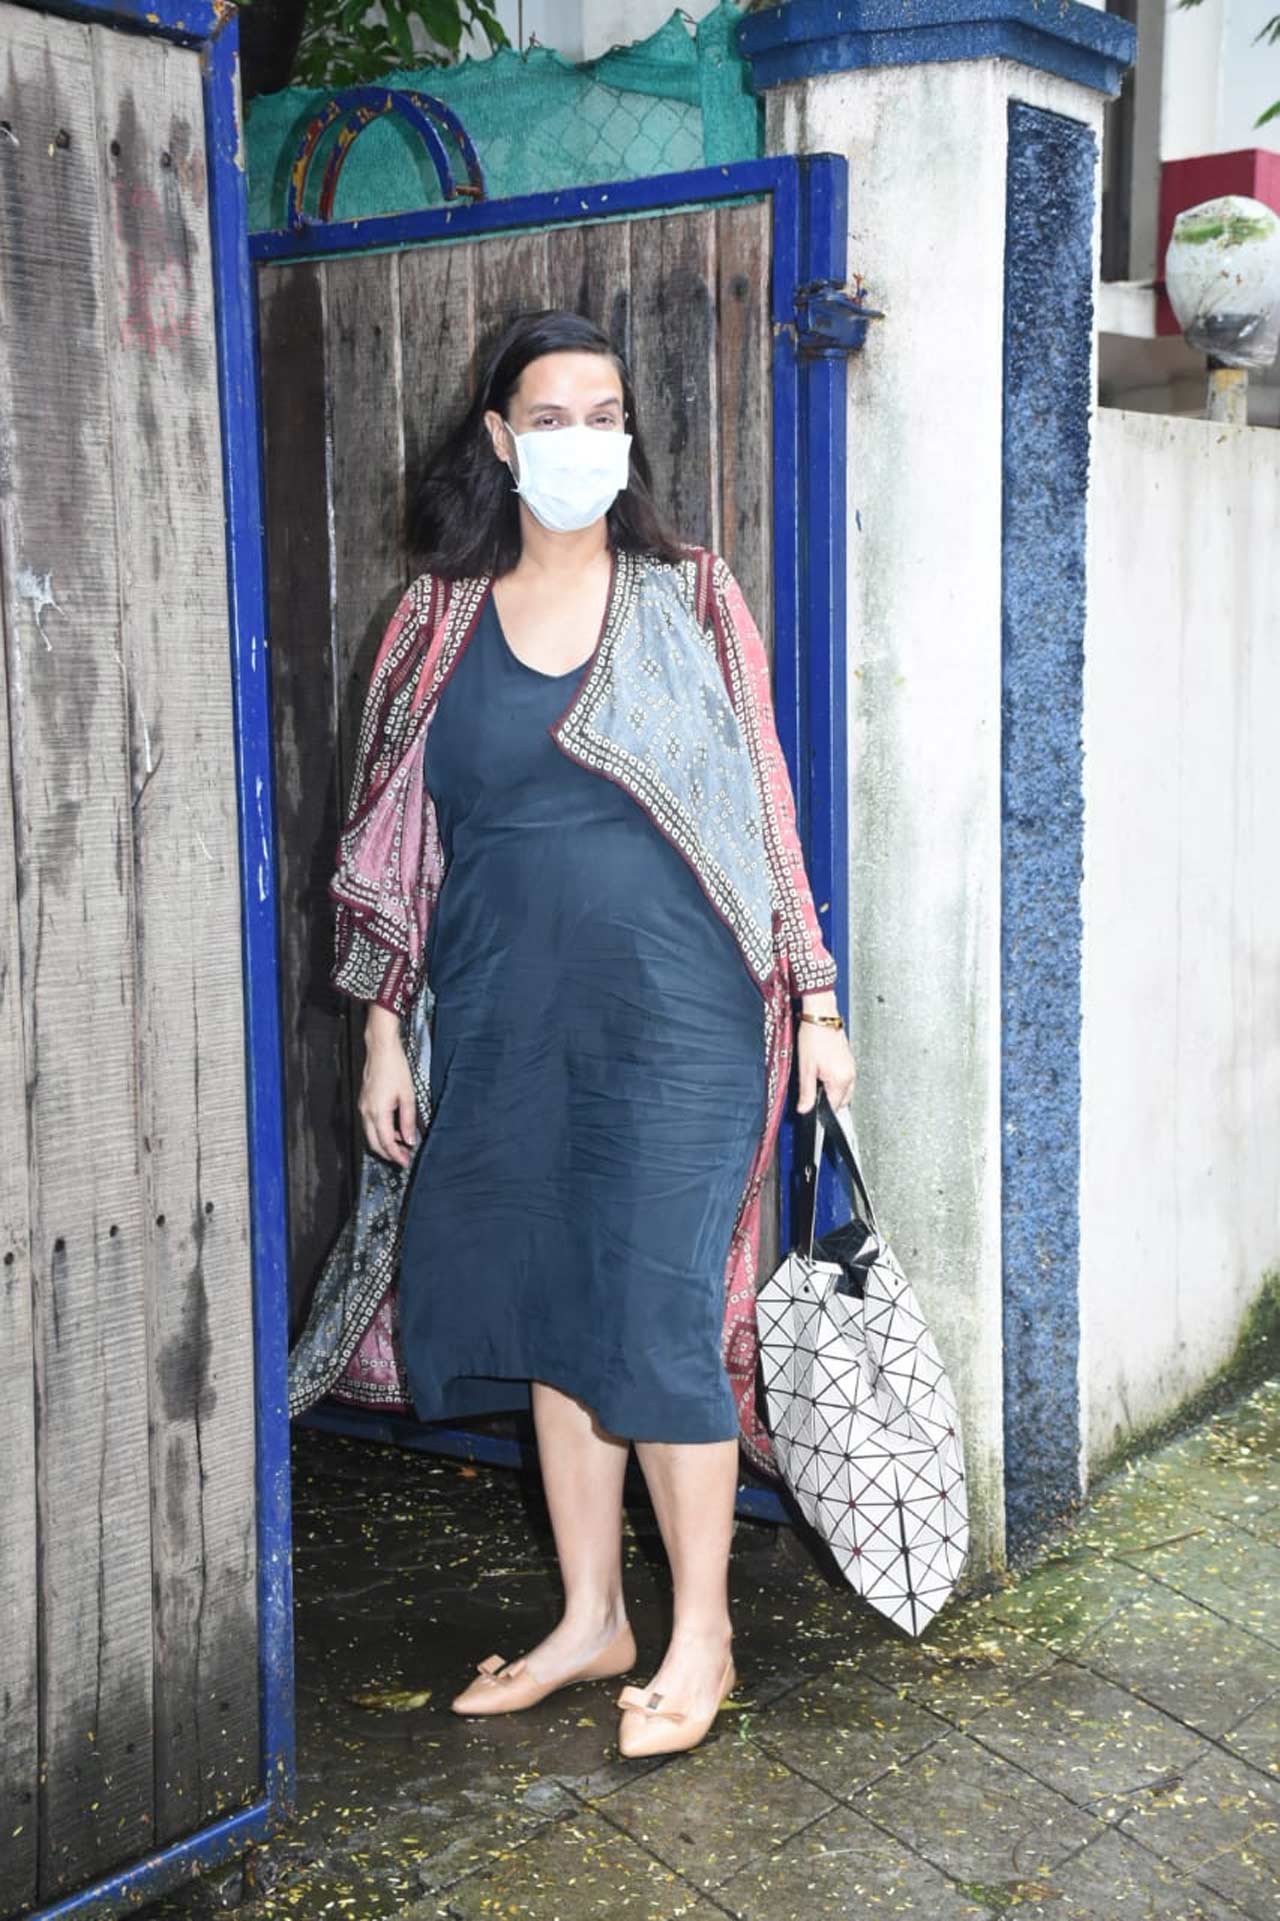 Neha Dhupia looked elegant as she was clicked by the paps. The actress, who is expecting her second child, is embracing all aspects of her pregnancy, especially her 5 am cravings! The 'Roadies' star took to her Instagram at 5 in the morning and posted a story saying, 